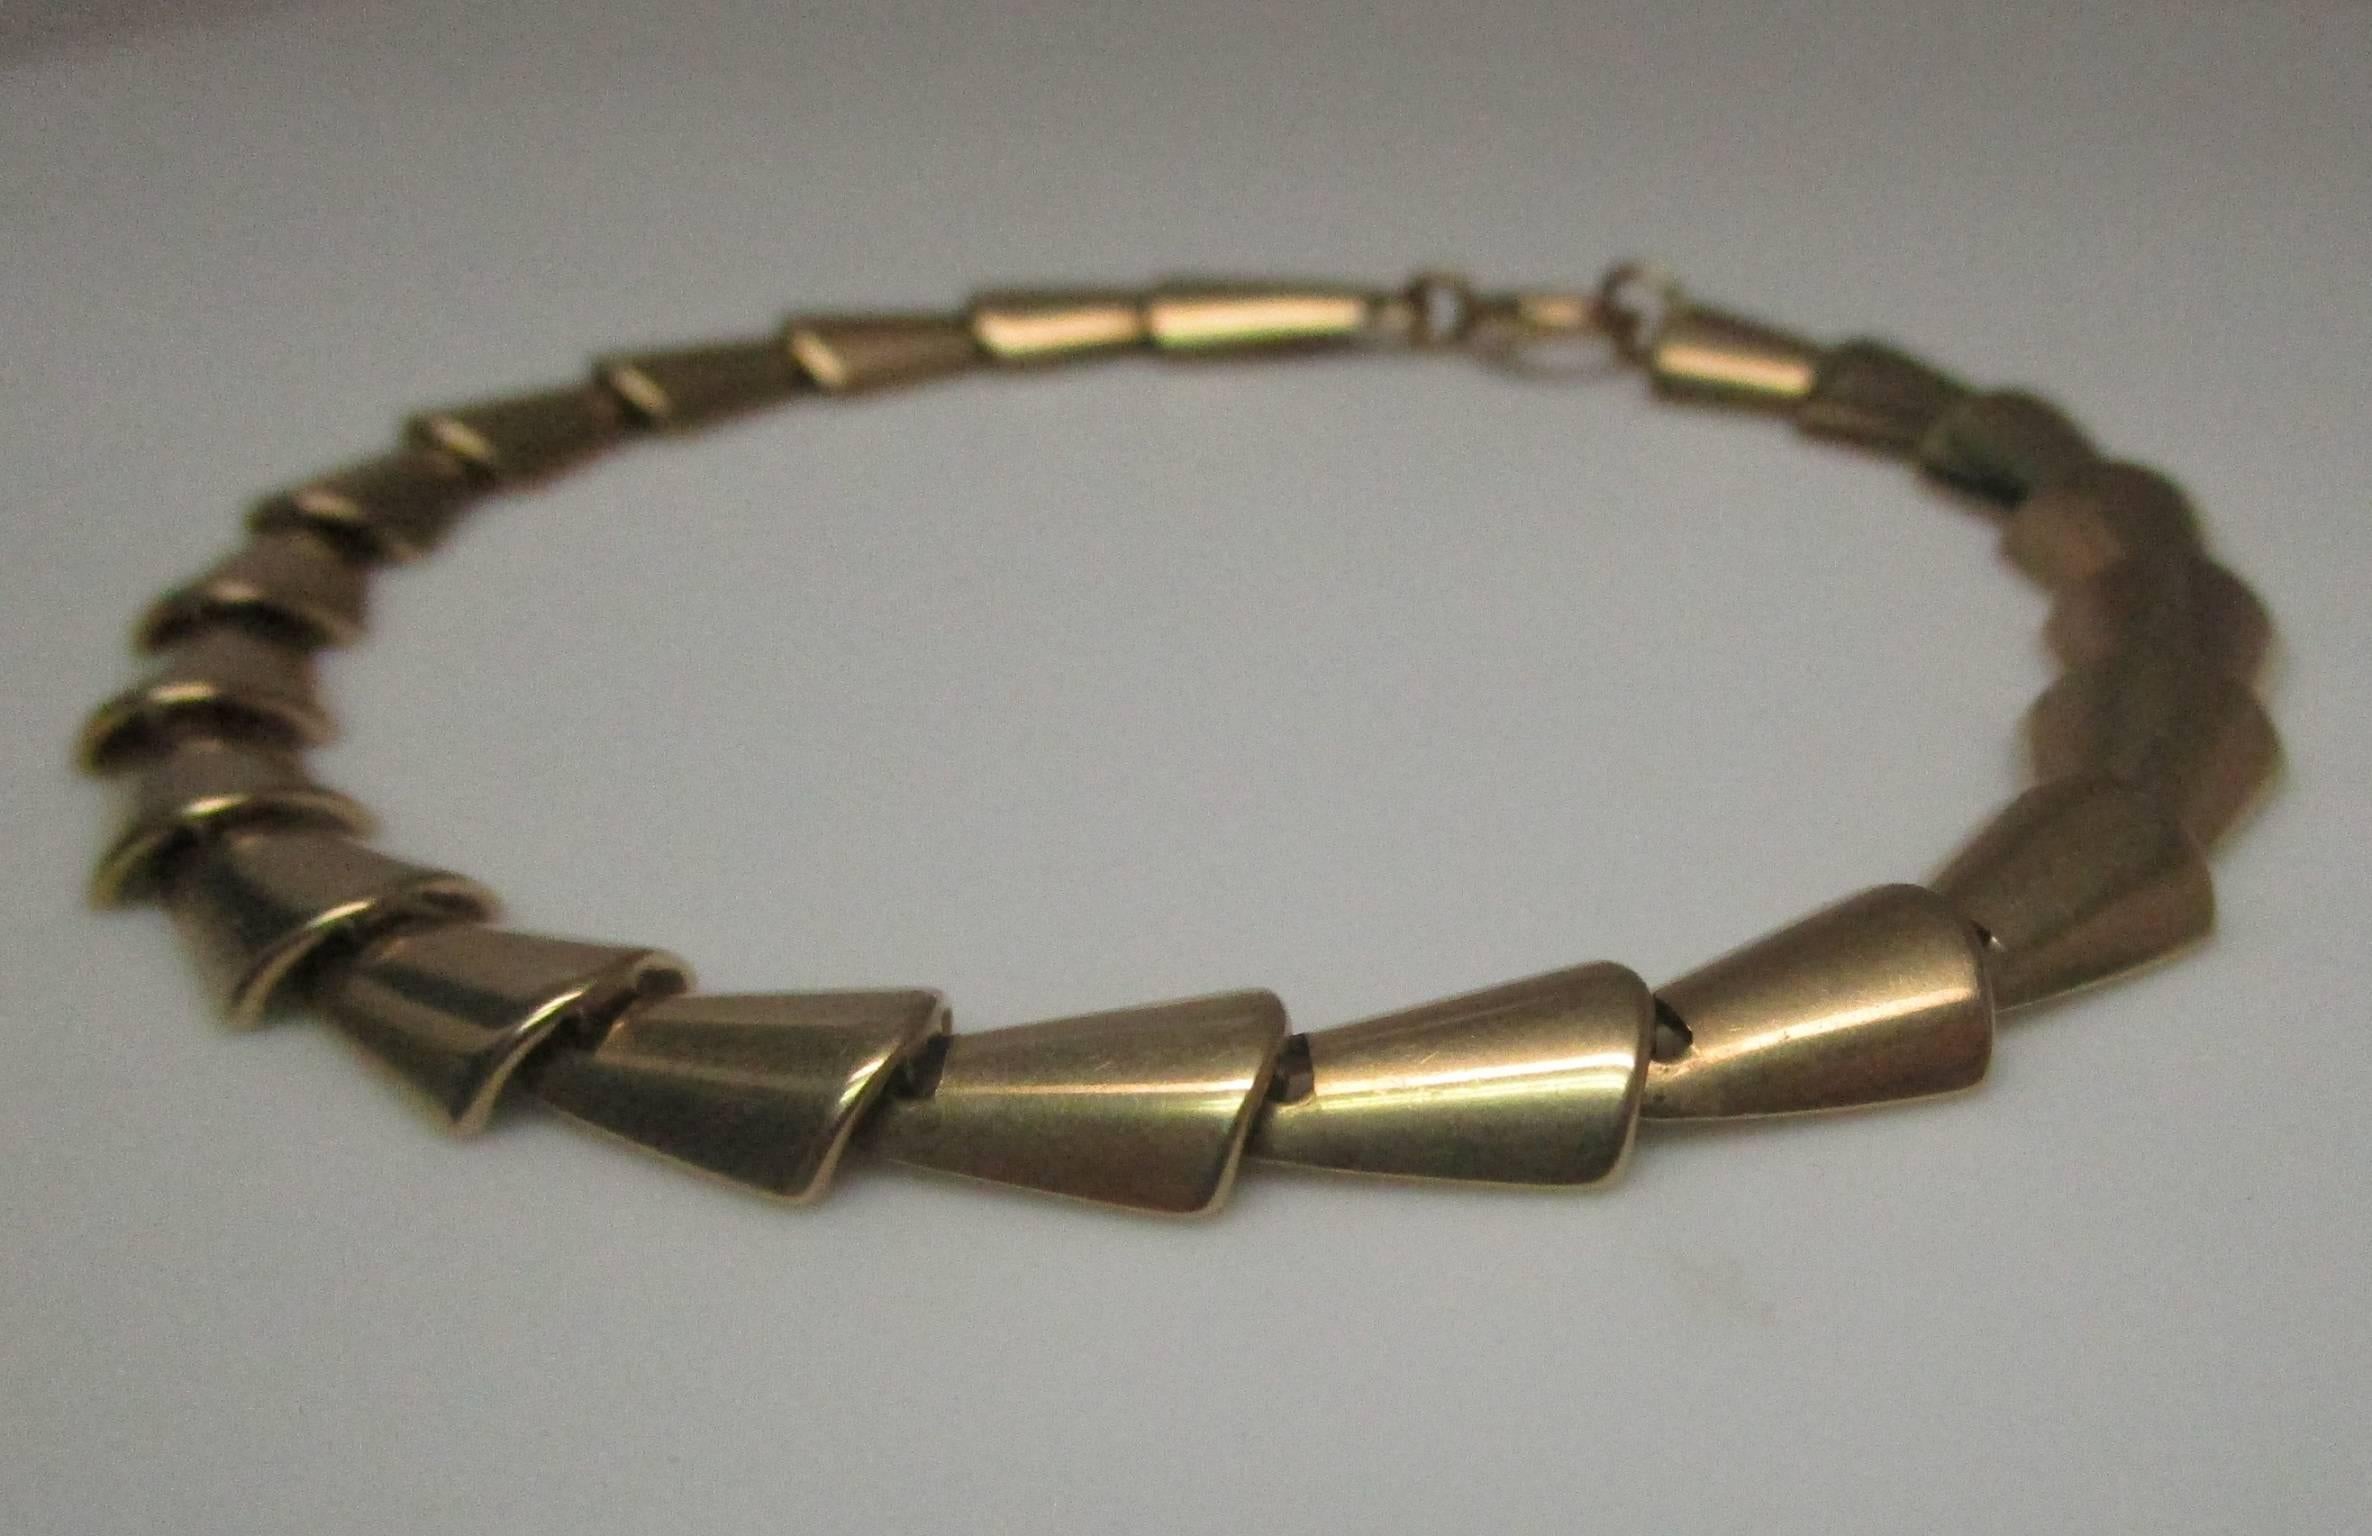 This bracelet is a marked Tiffany Art Deco/ Retro piece. It is fluid and comfortable to wear. Style like this never goes out of fashion and would look equally becoming at a dinner party or quick trip to the store. This is going to be your go-to